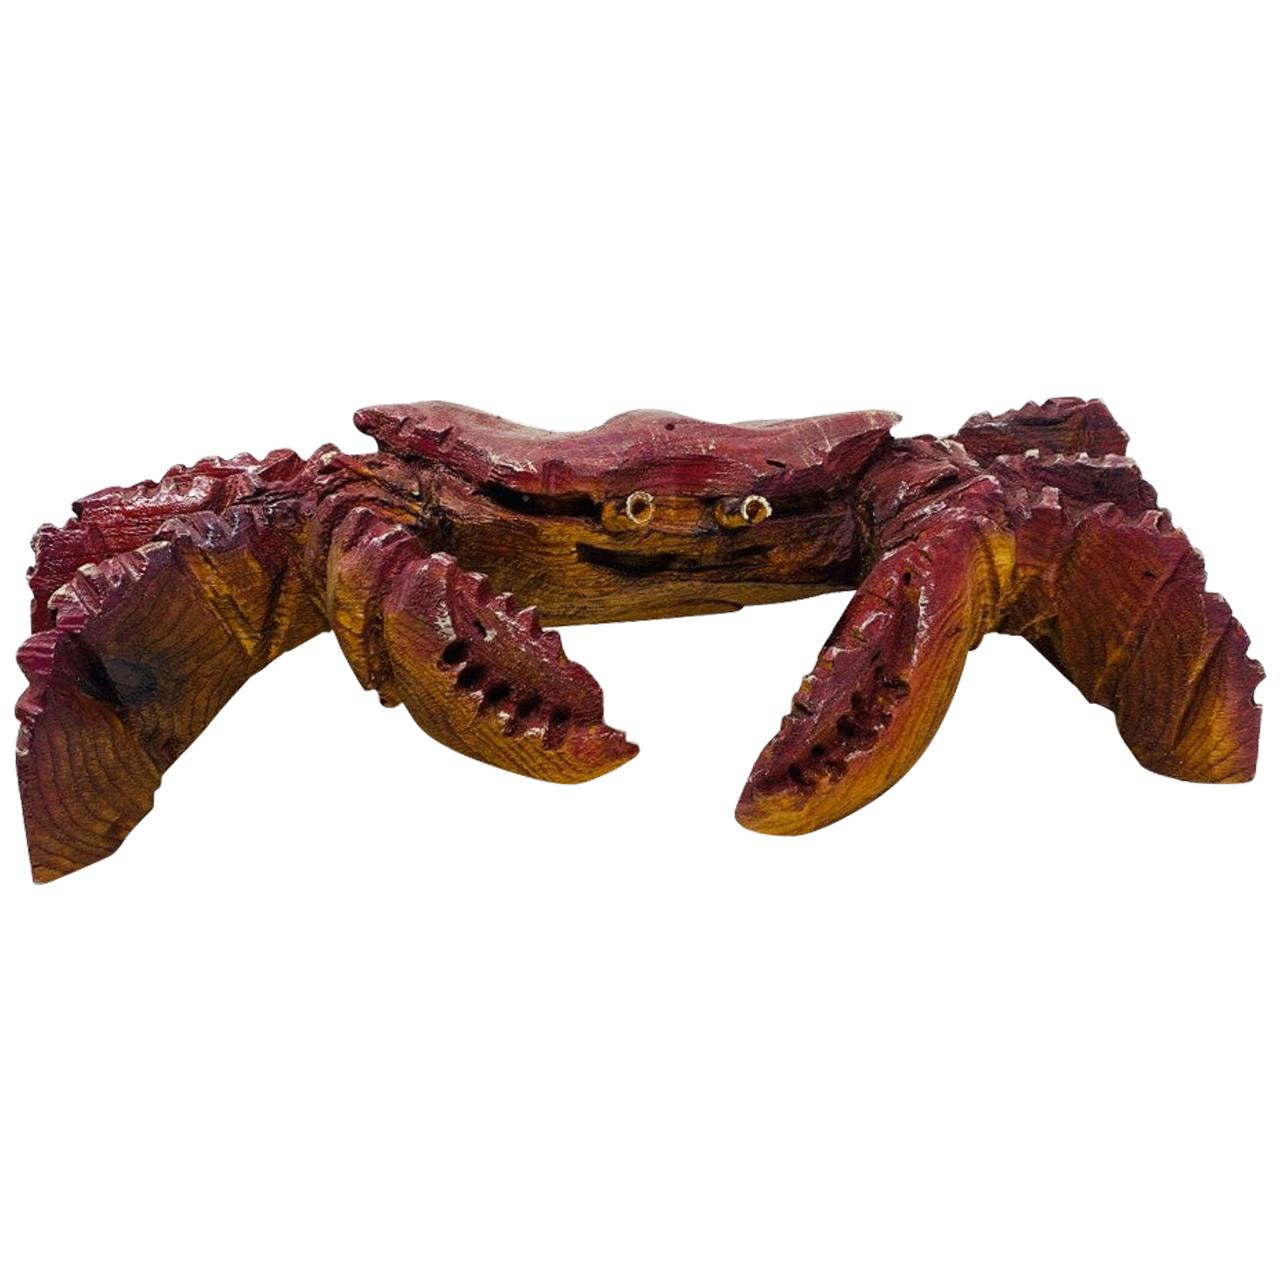 Carved Wood Giant Crab Sculpture